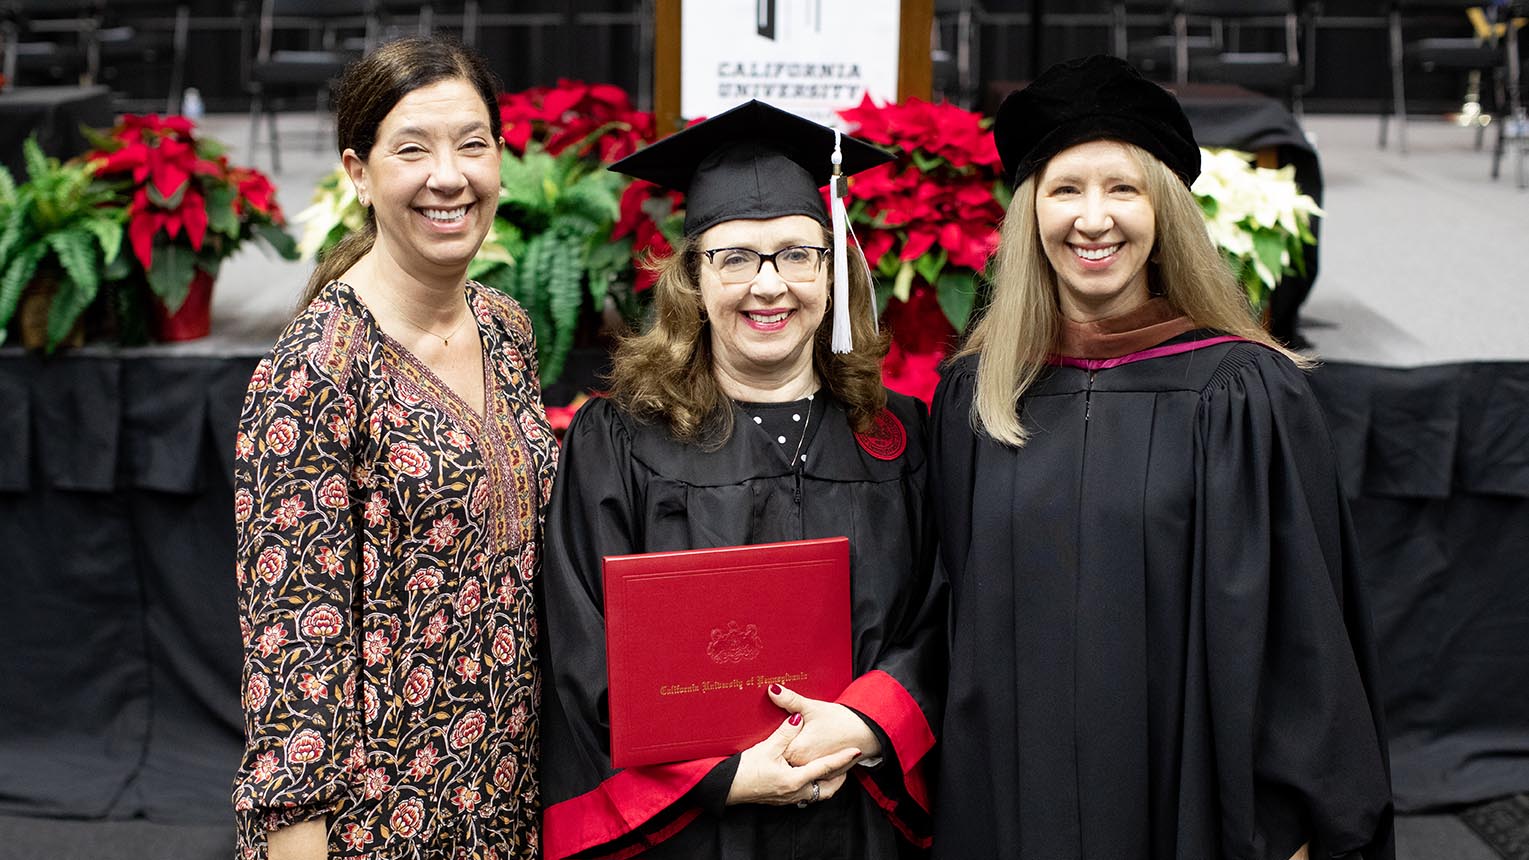 Suzan Gingery fulfills a lifelong goal as she graduates with a degree in history at Cal U's 193rd Commencement.